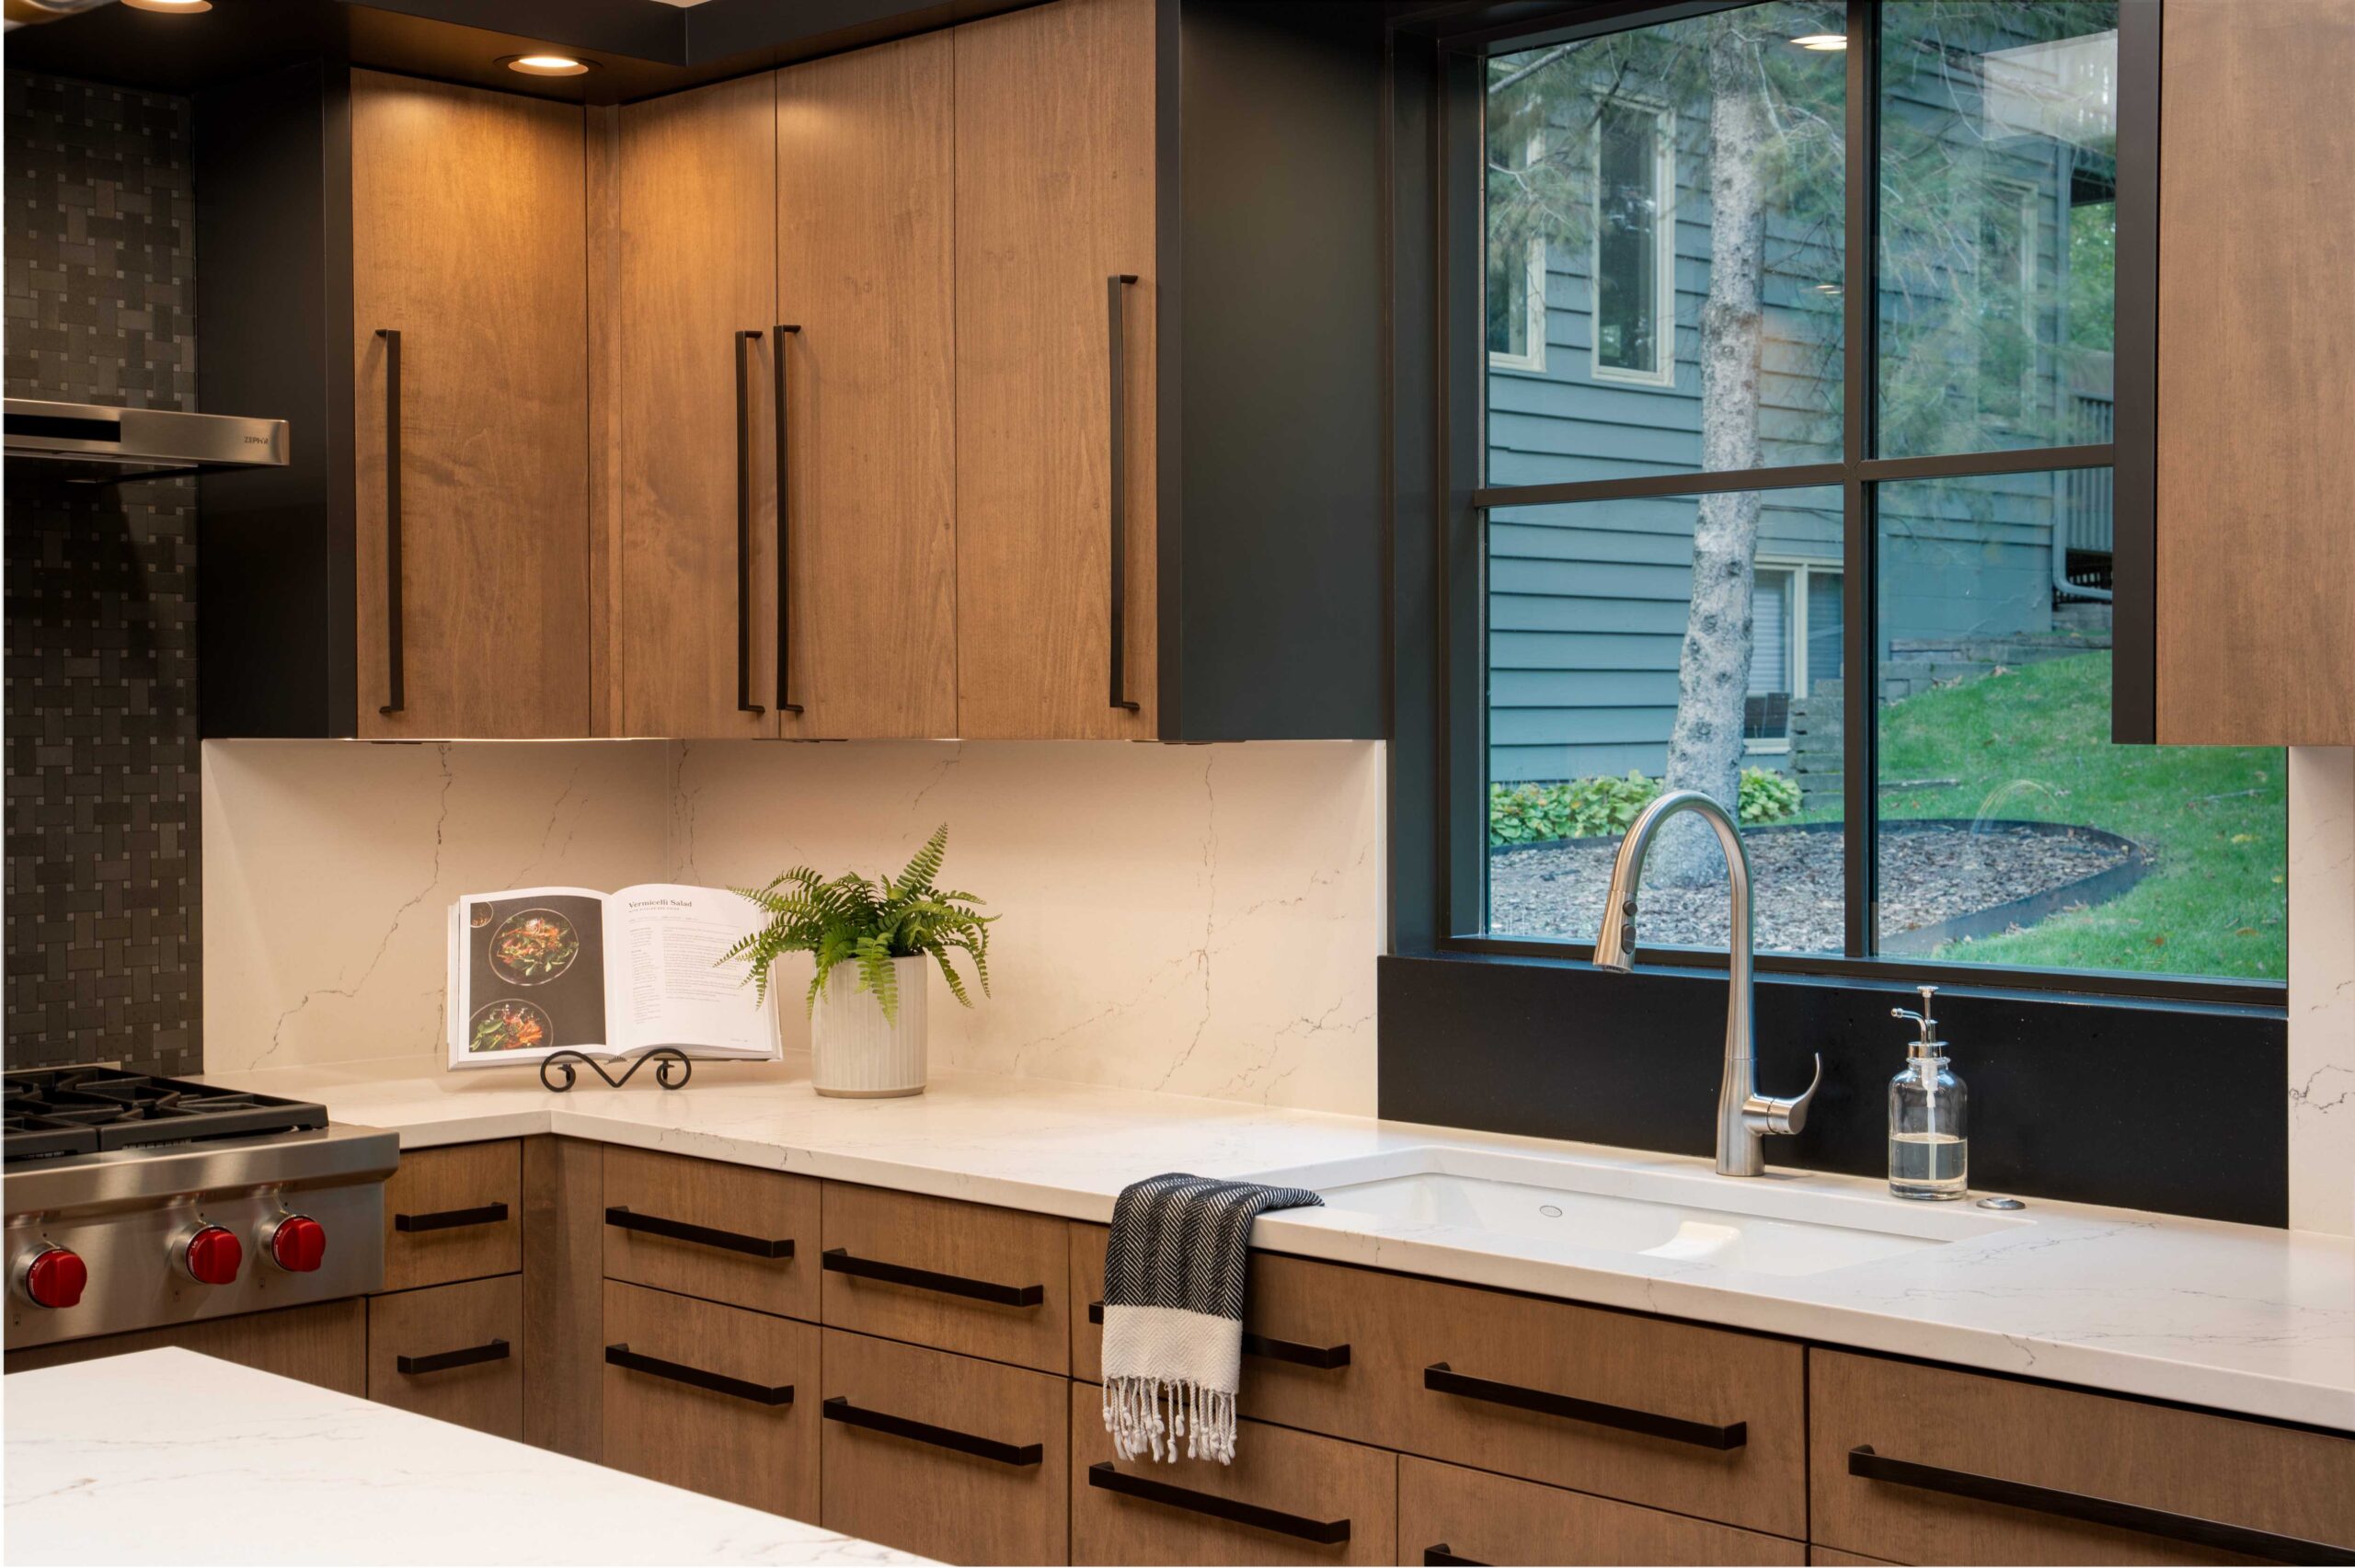 A modern Bloomington kitchen remodel with black cabinets and a window.